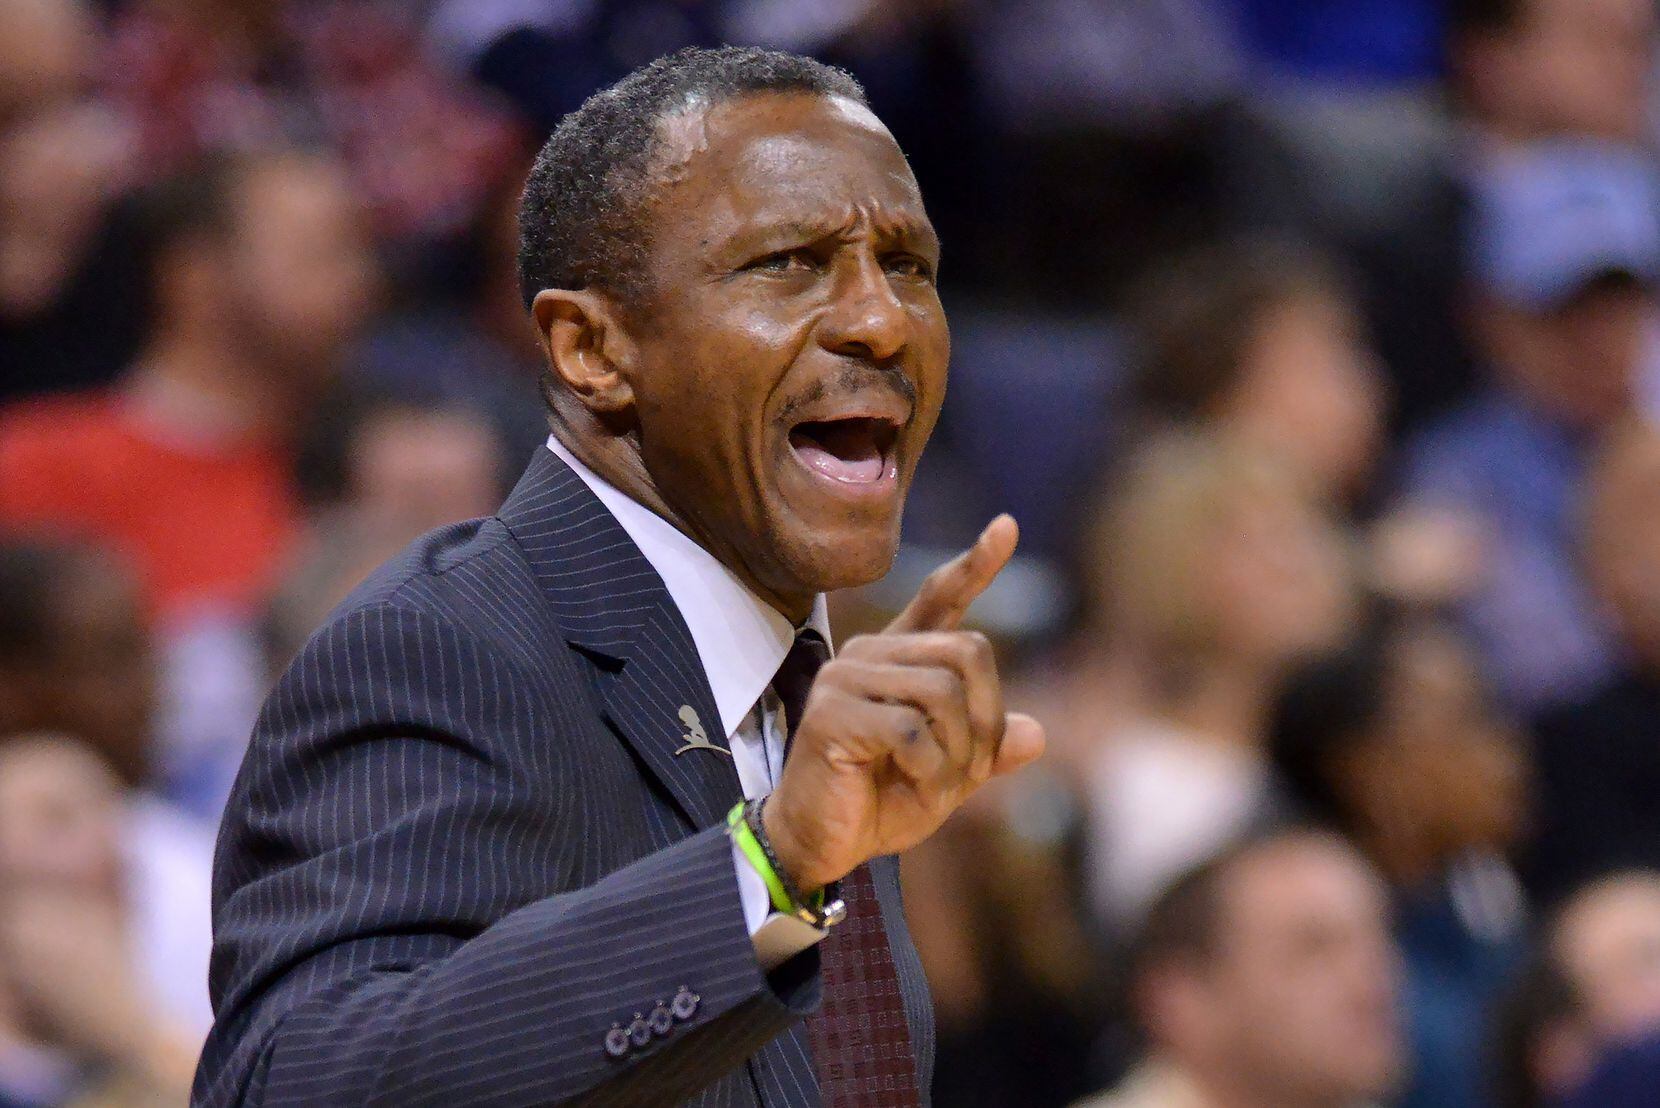 Toronto Raptors head coach Dwane Casey shouts from the sideline in the second half of an NBA basketball game against the Memphis Grizzlies, Wednesday, Jan. 21, 2015, in Memphis, Tenn.